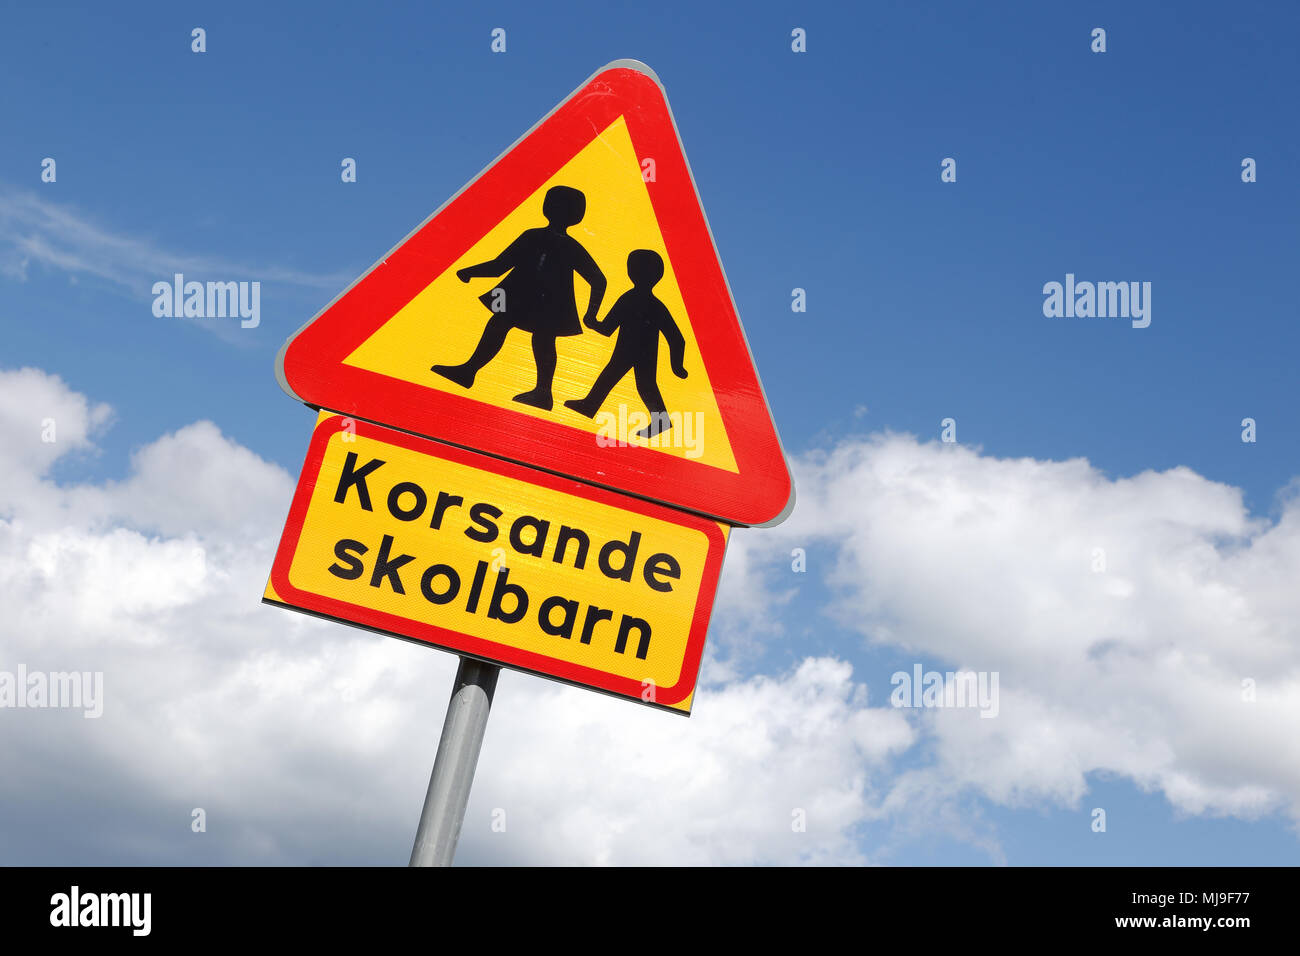 Swedish road sign, warning for children with additional sign with the text, intersecting school children, isolate on blue sky with clouds. Stock Photo